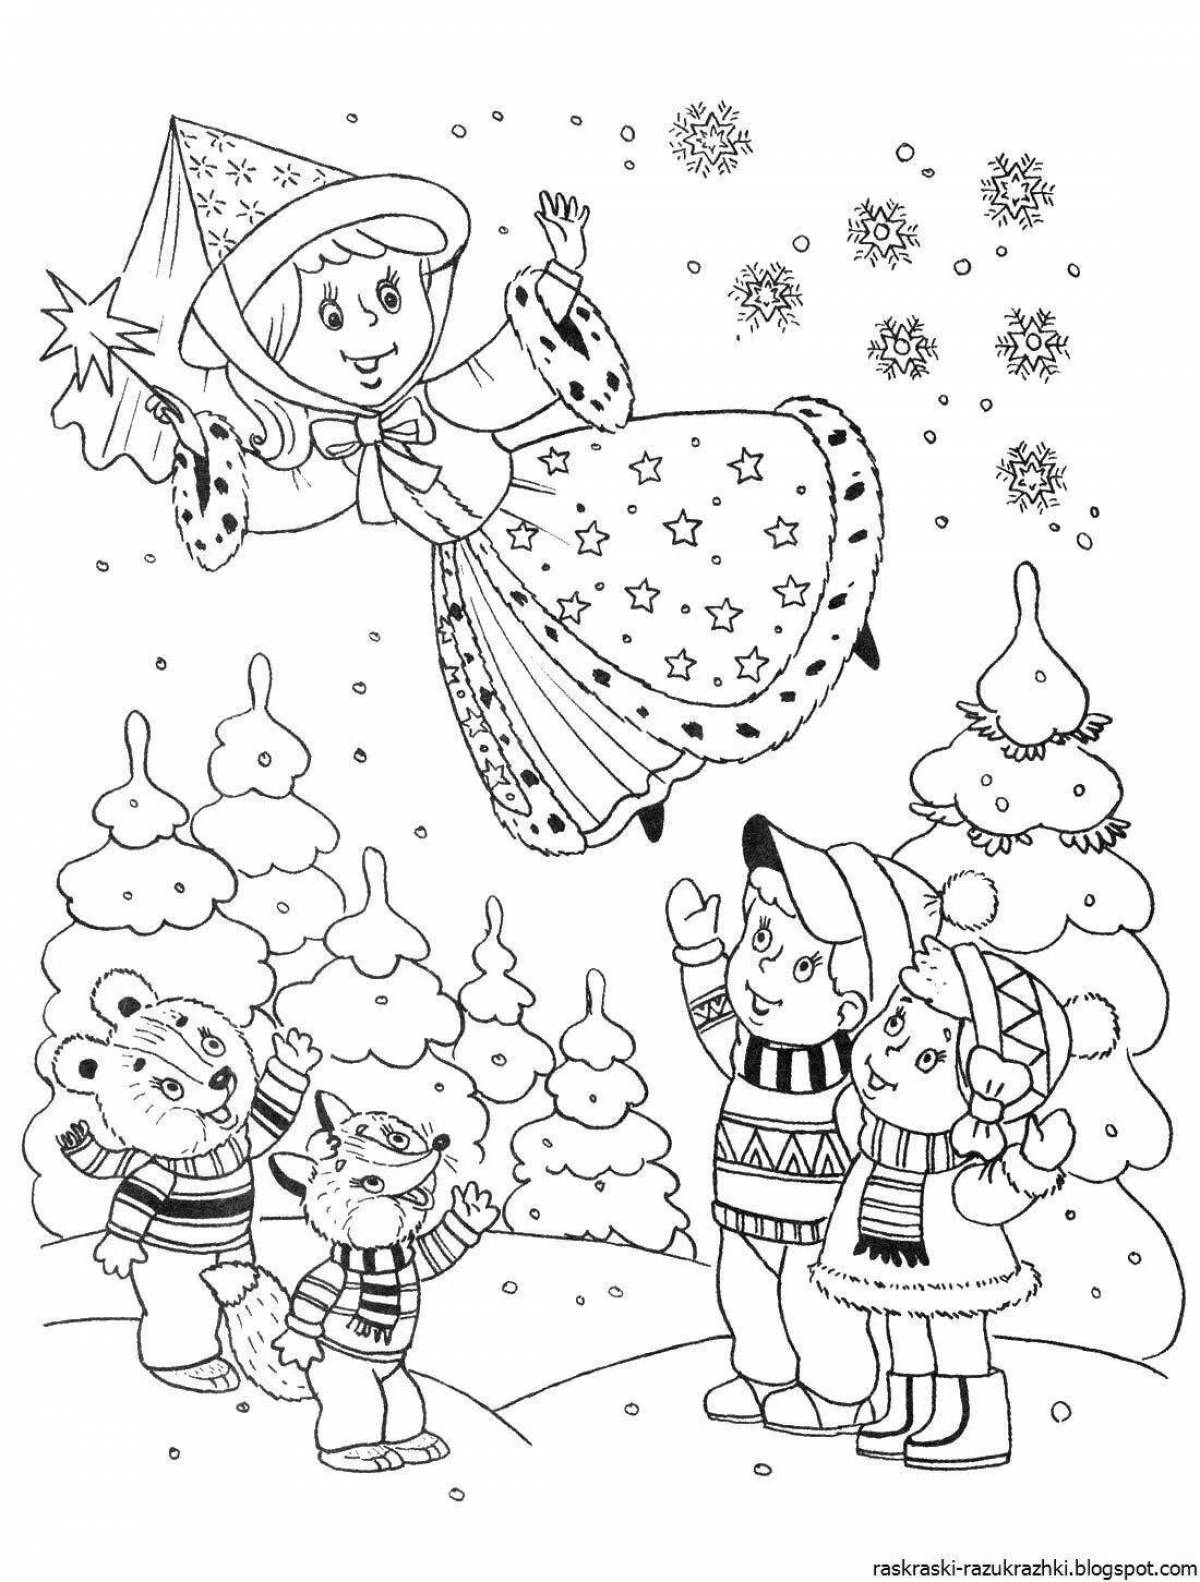 Gorgeous winter coloring book for kids